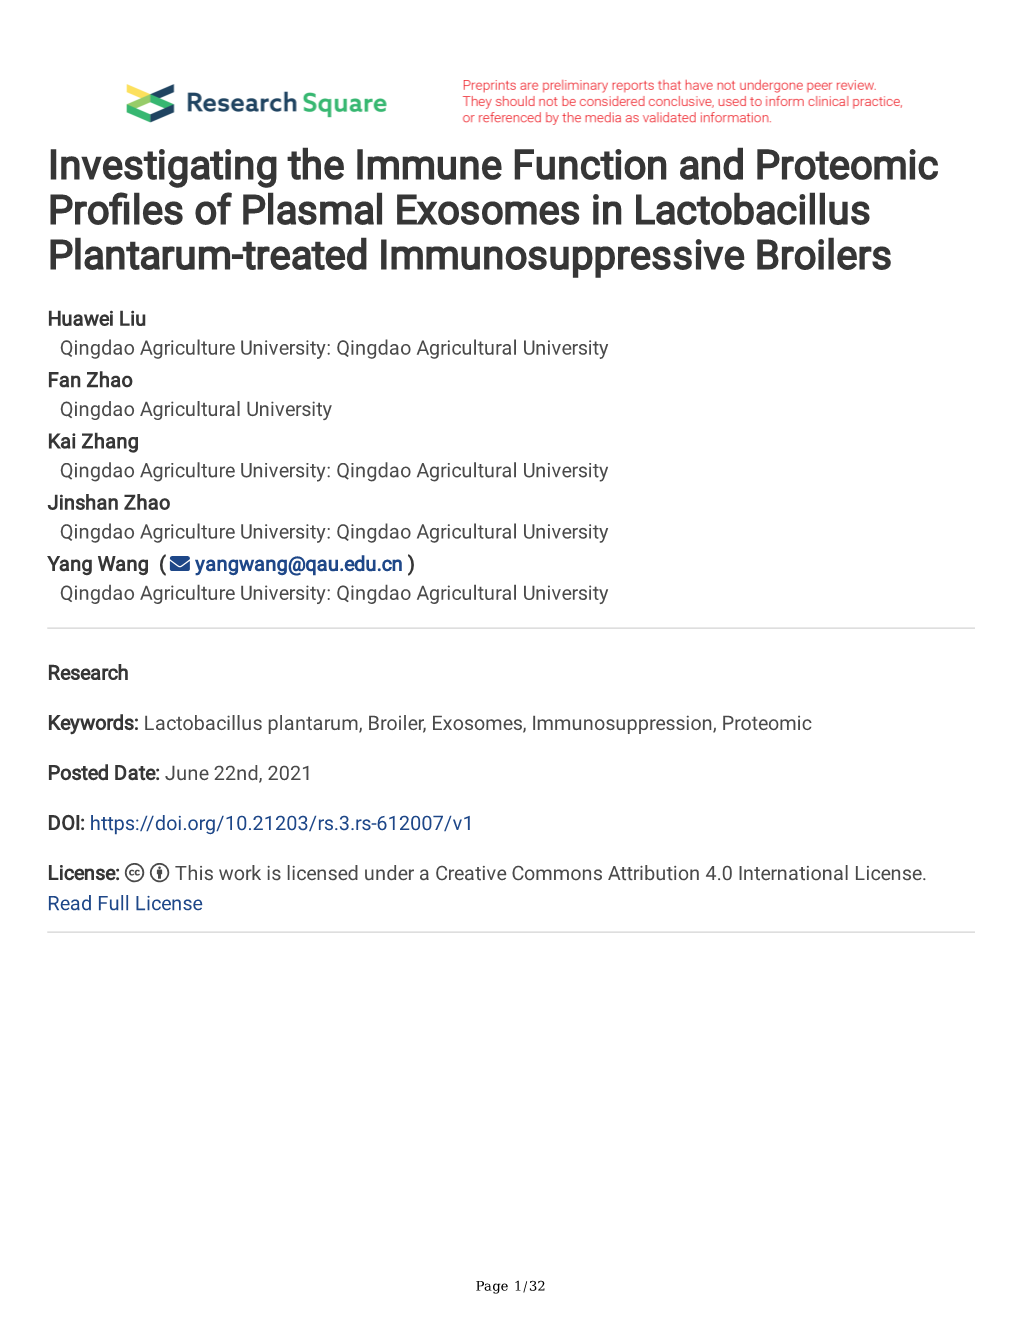 Investigating the Immune Function and Proteomic Pro Les of Plasmal